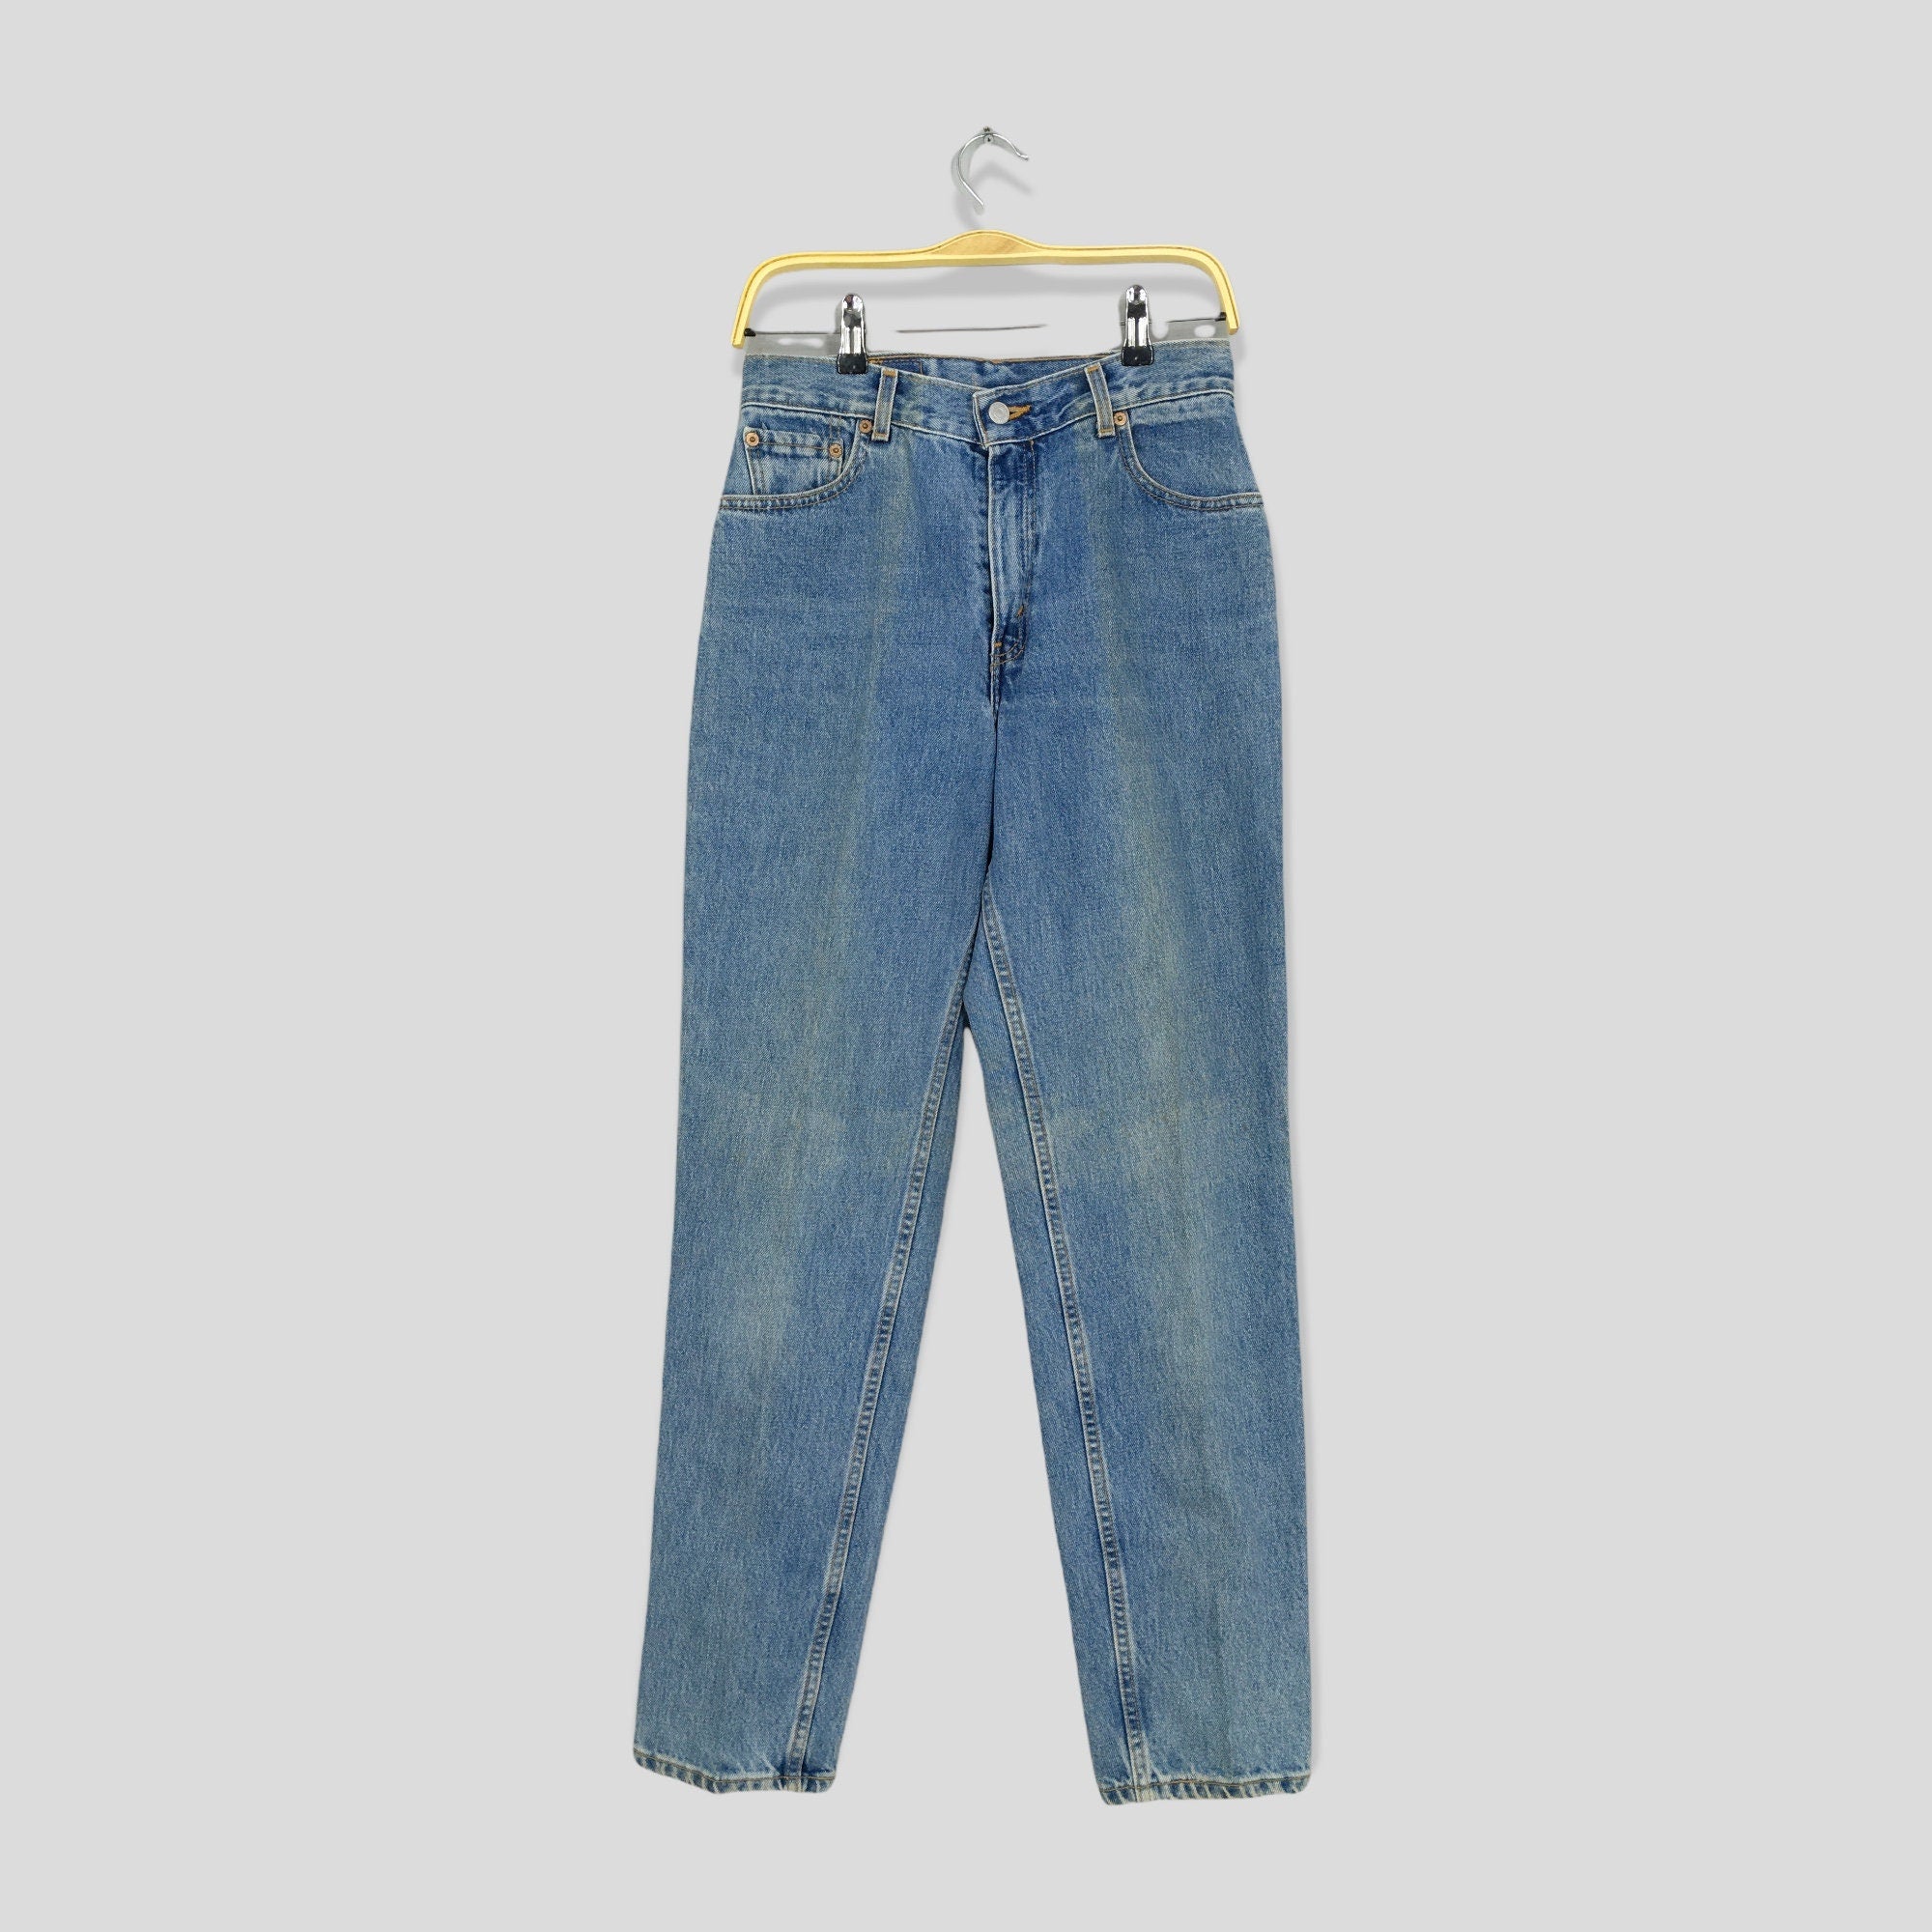 Levi's 550 Jeans Tapered Leg Size  – axevin